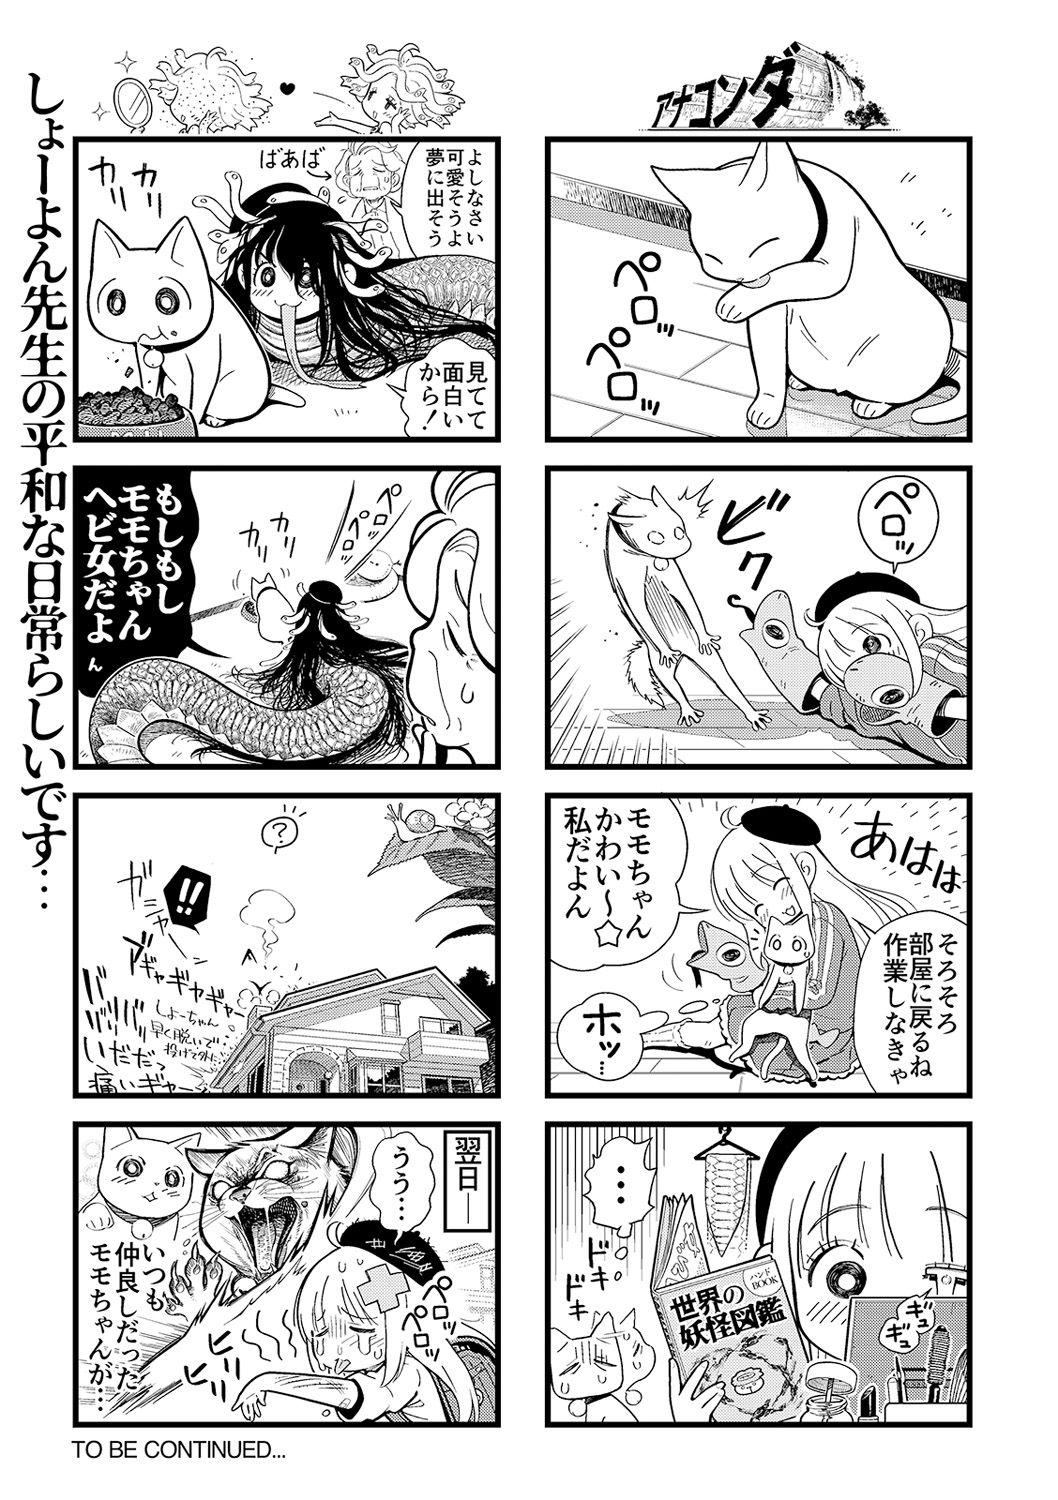 Oldvsyoung COMIC Mate Legend Vol. 33 2020-06 Online - Page 256